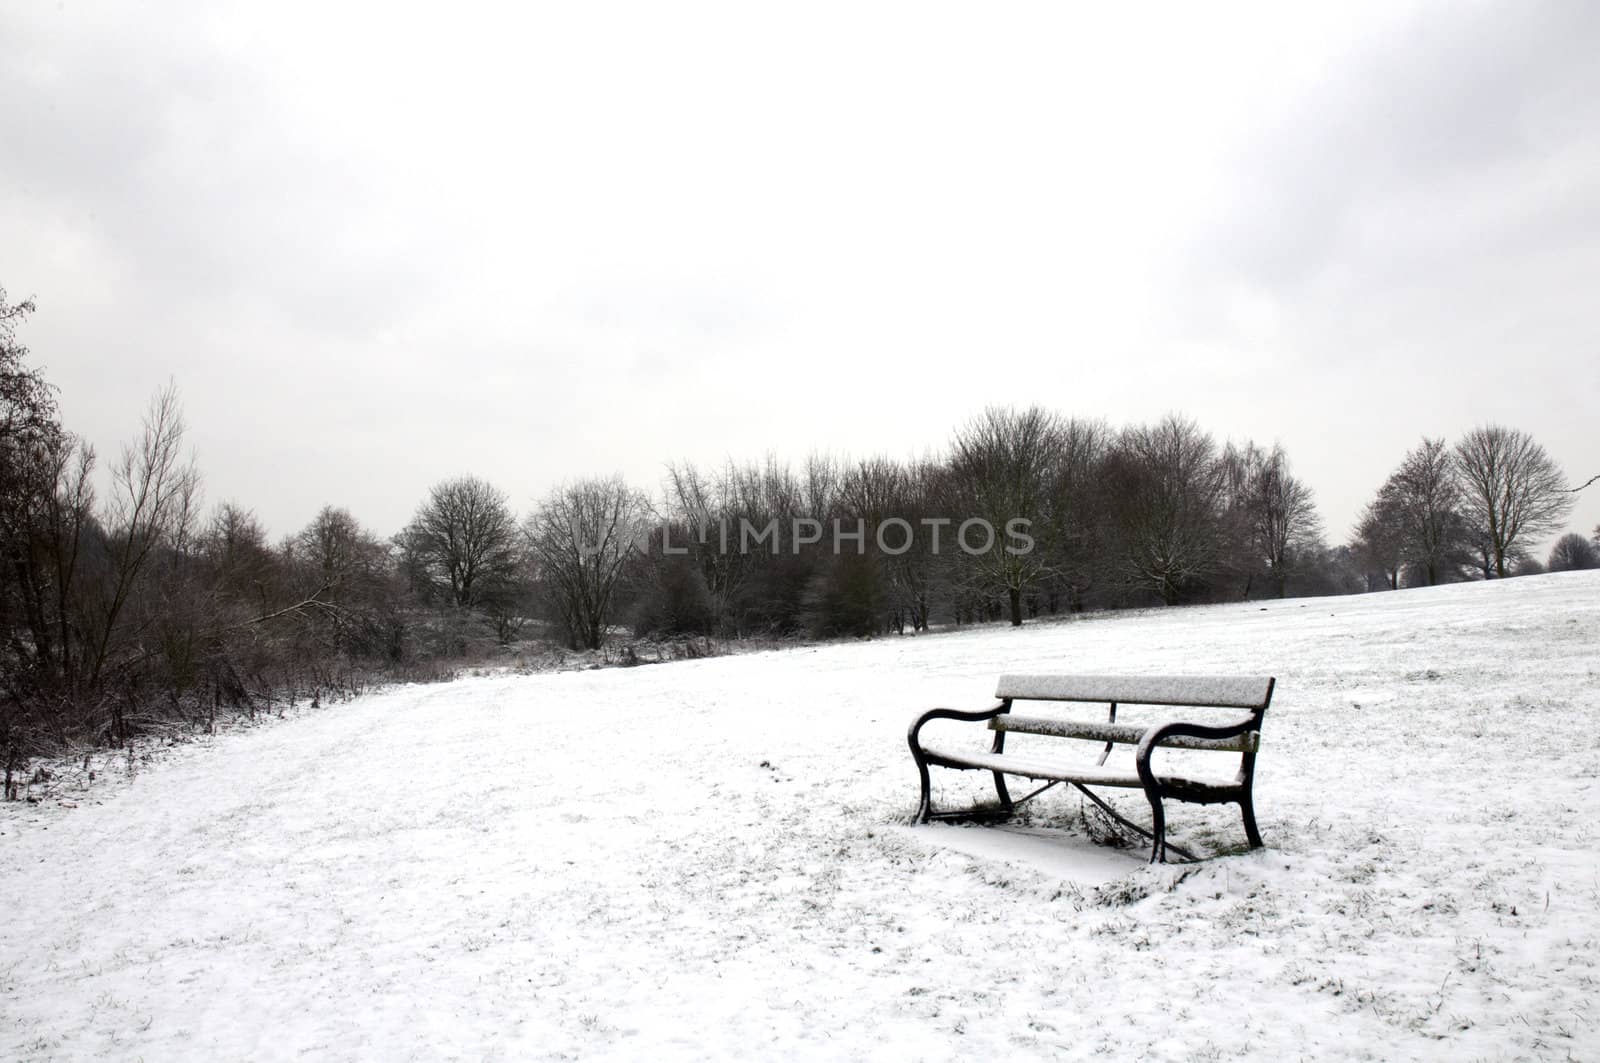 A path bench in a park covered in snow with trees in the background